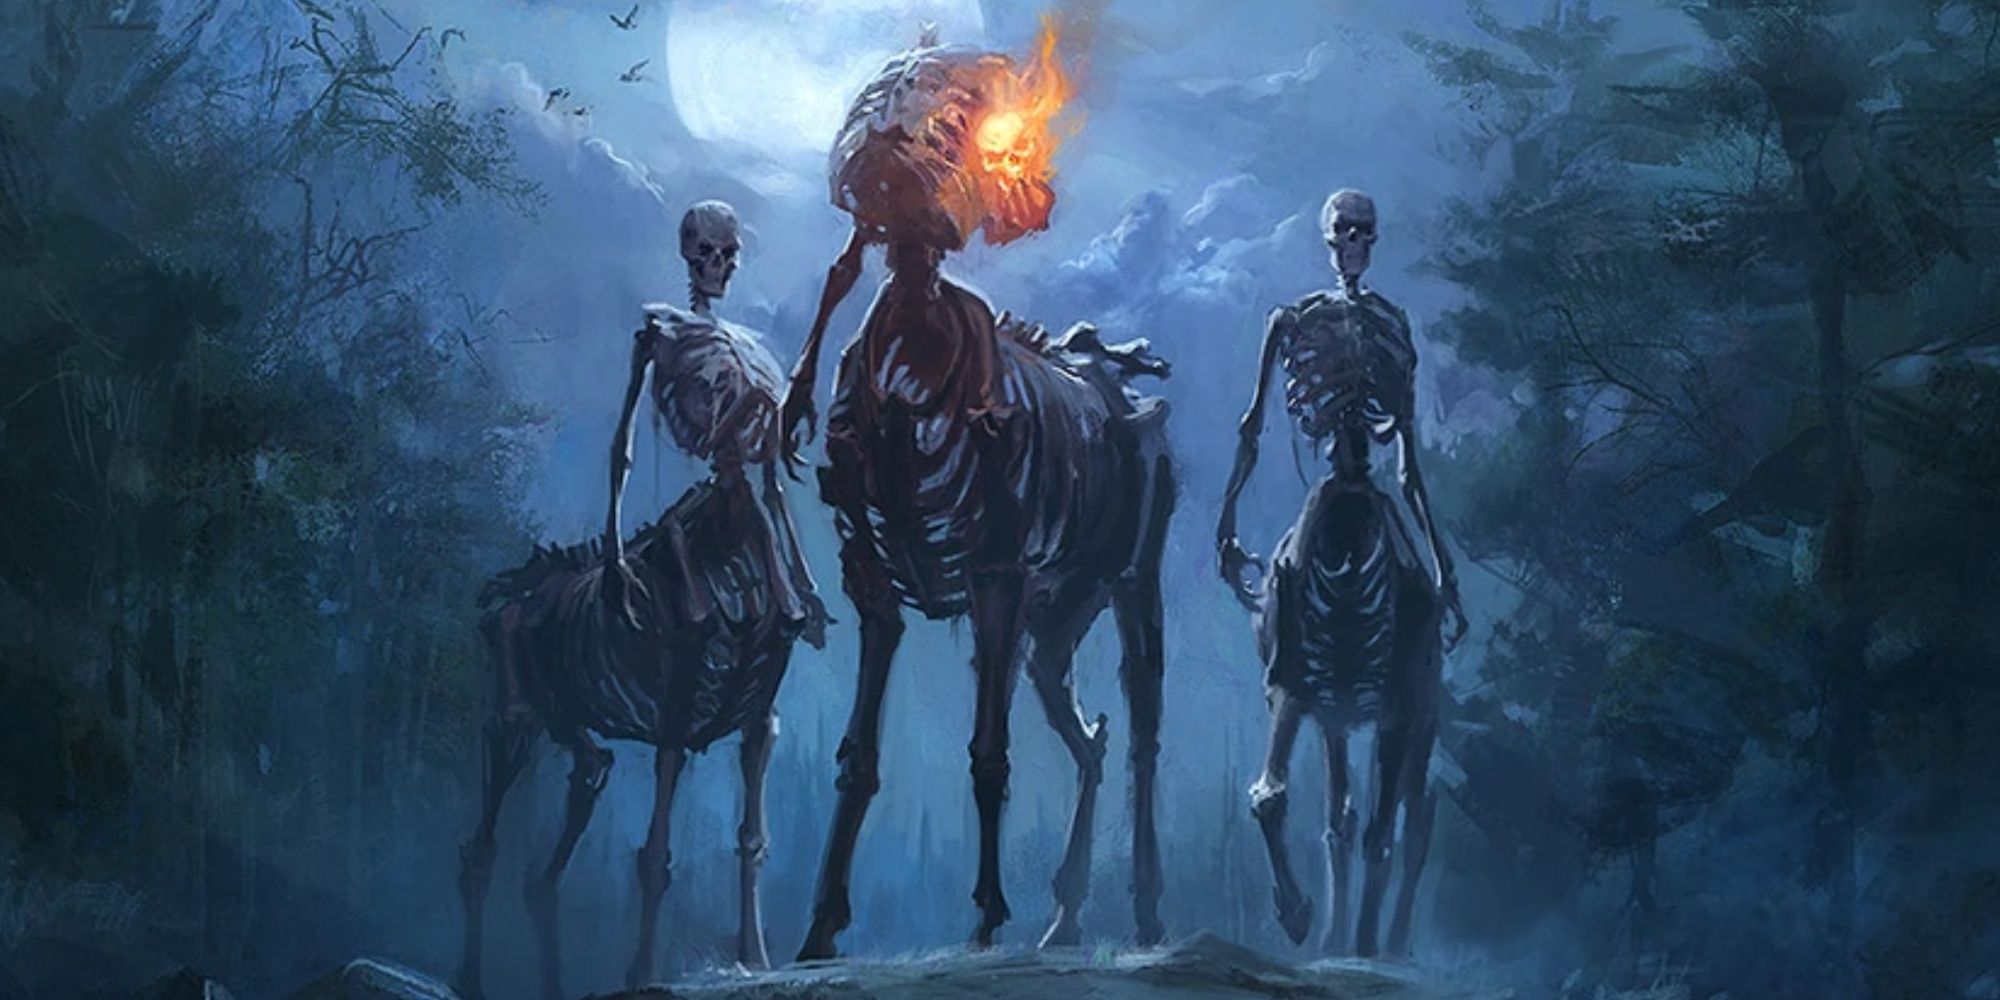 Official centaur art by John Anthony Di Giovanni The Herd of the Damned cropped